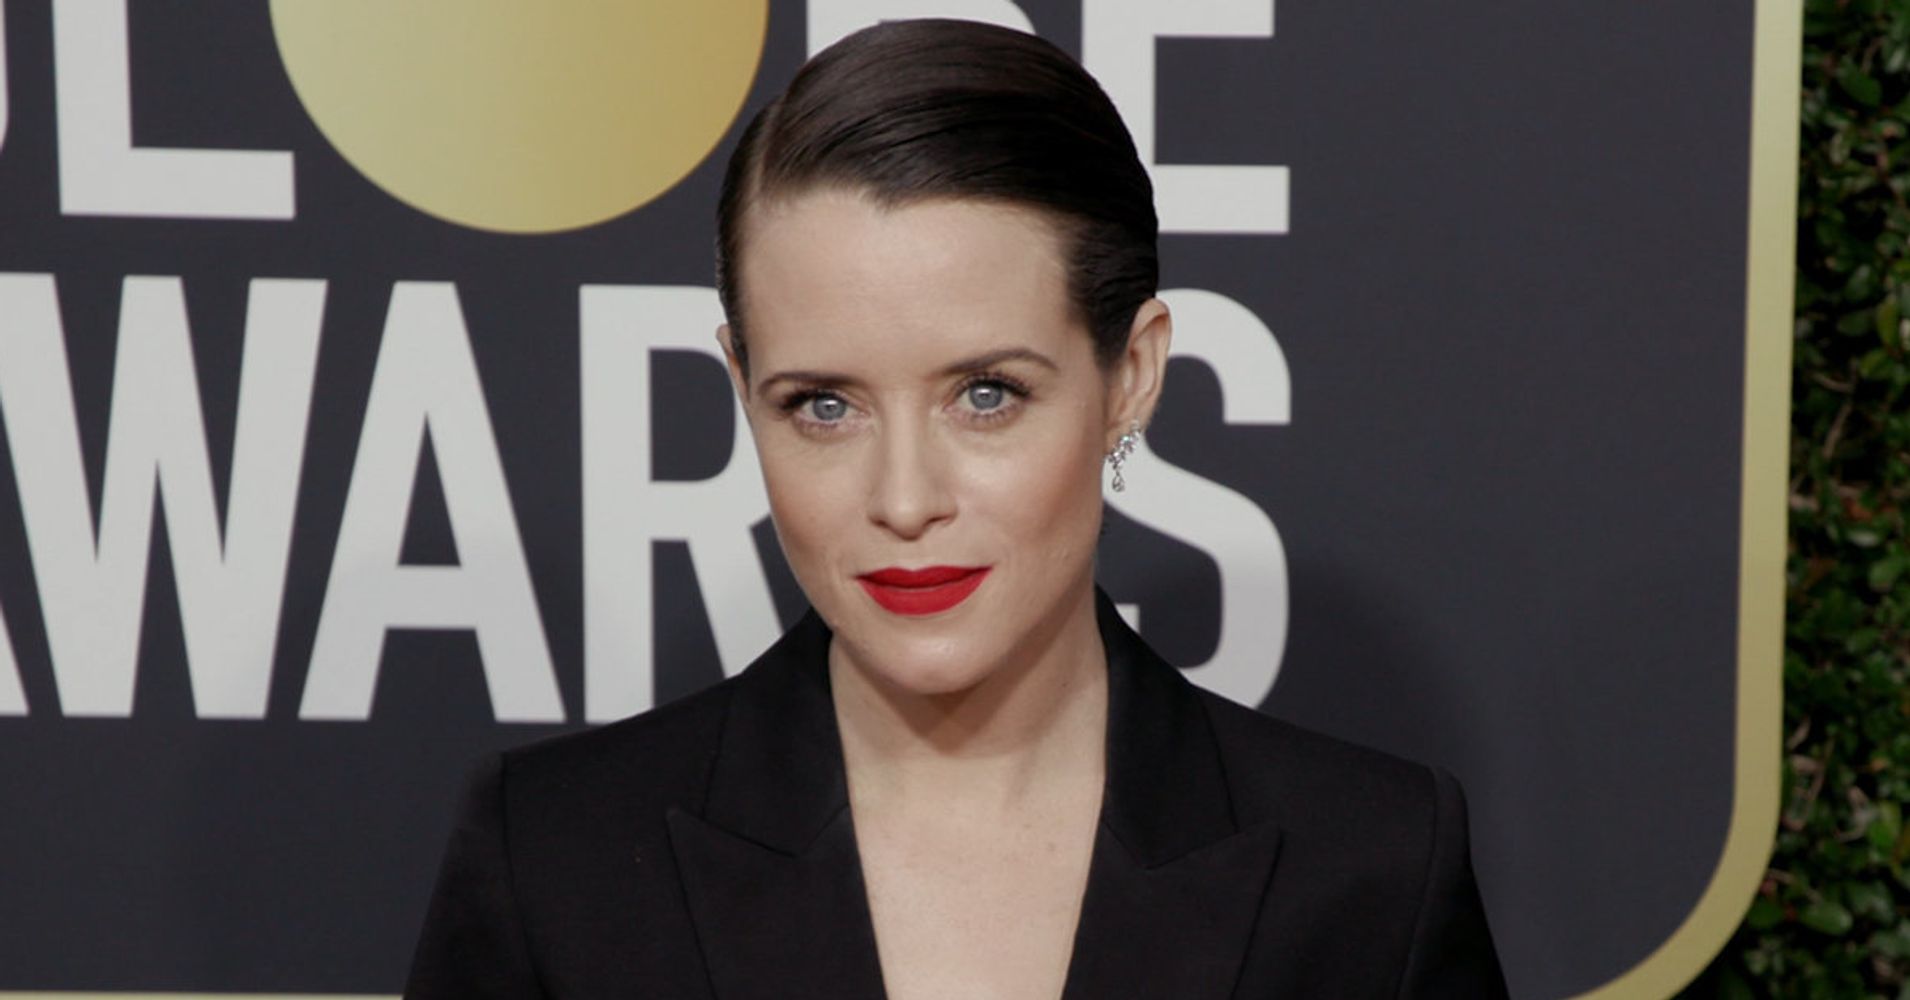 Netflix Pays The Crown Star Claire Foy What She Deserves After Wage